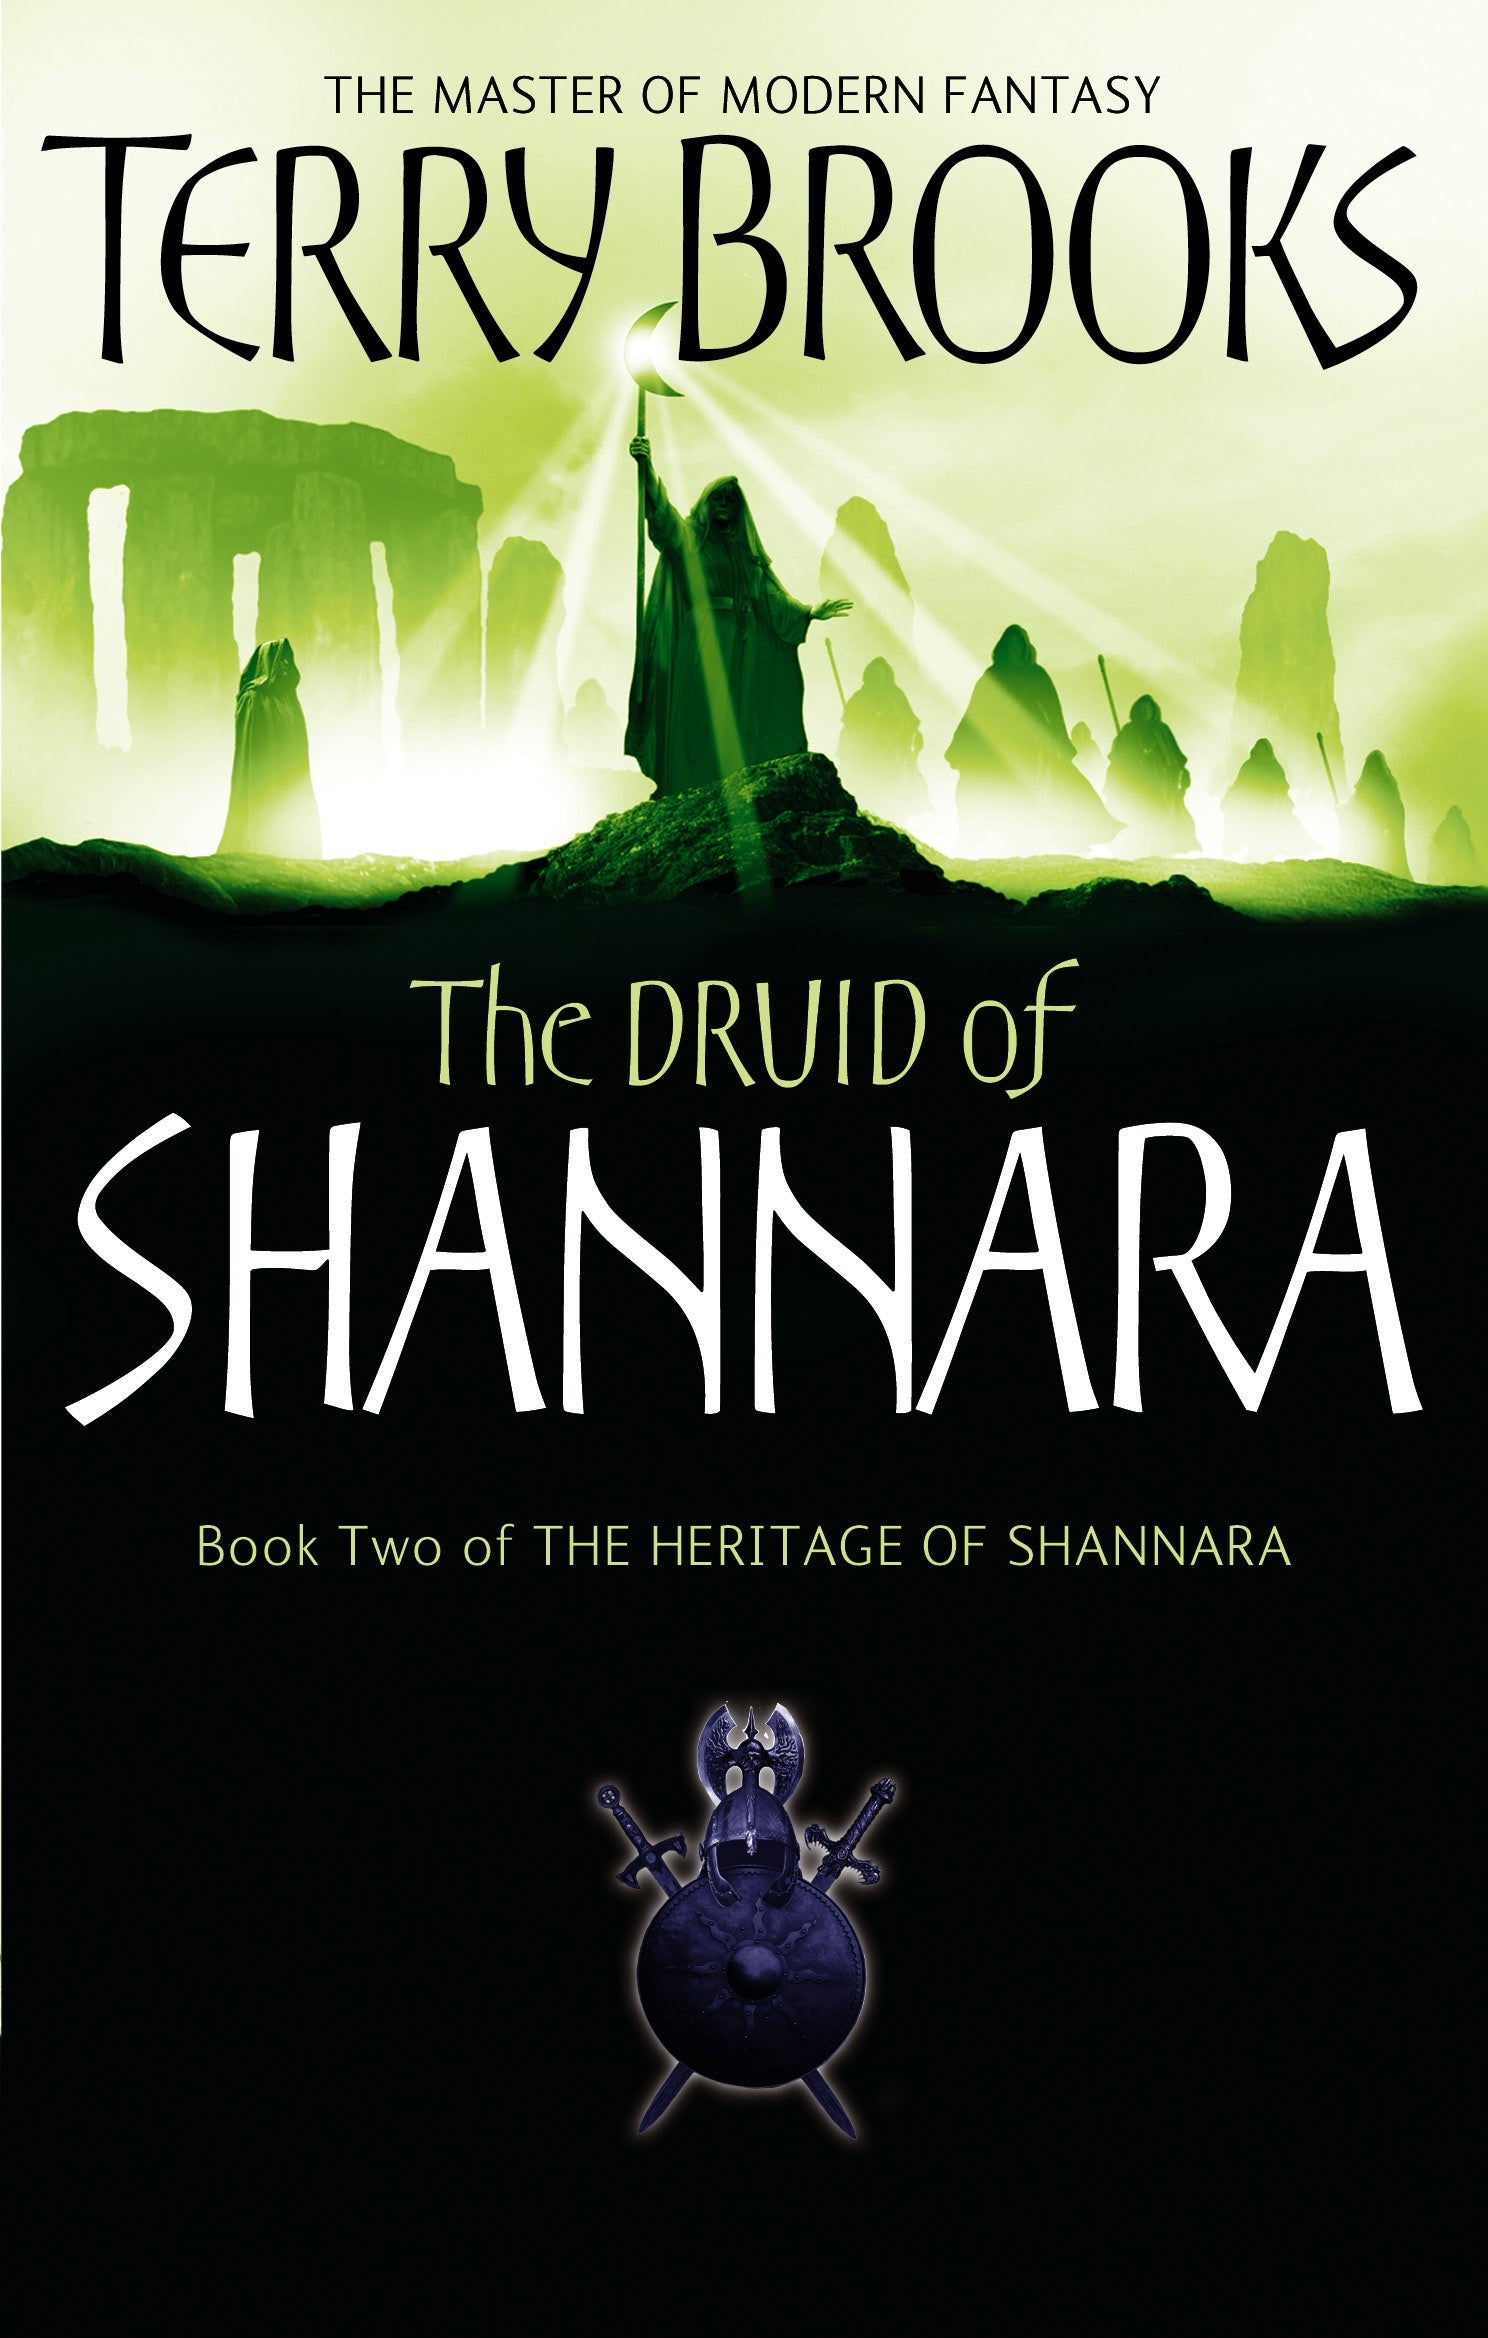 The Druid Of Shannara by Terry Brooks